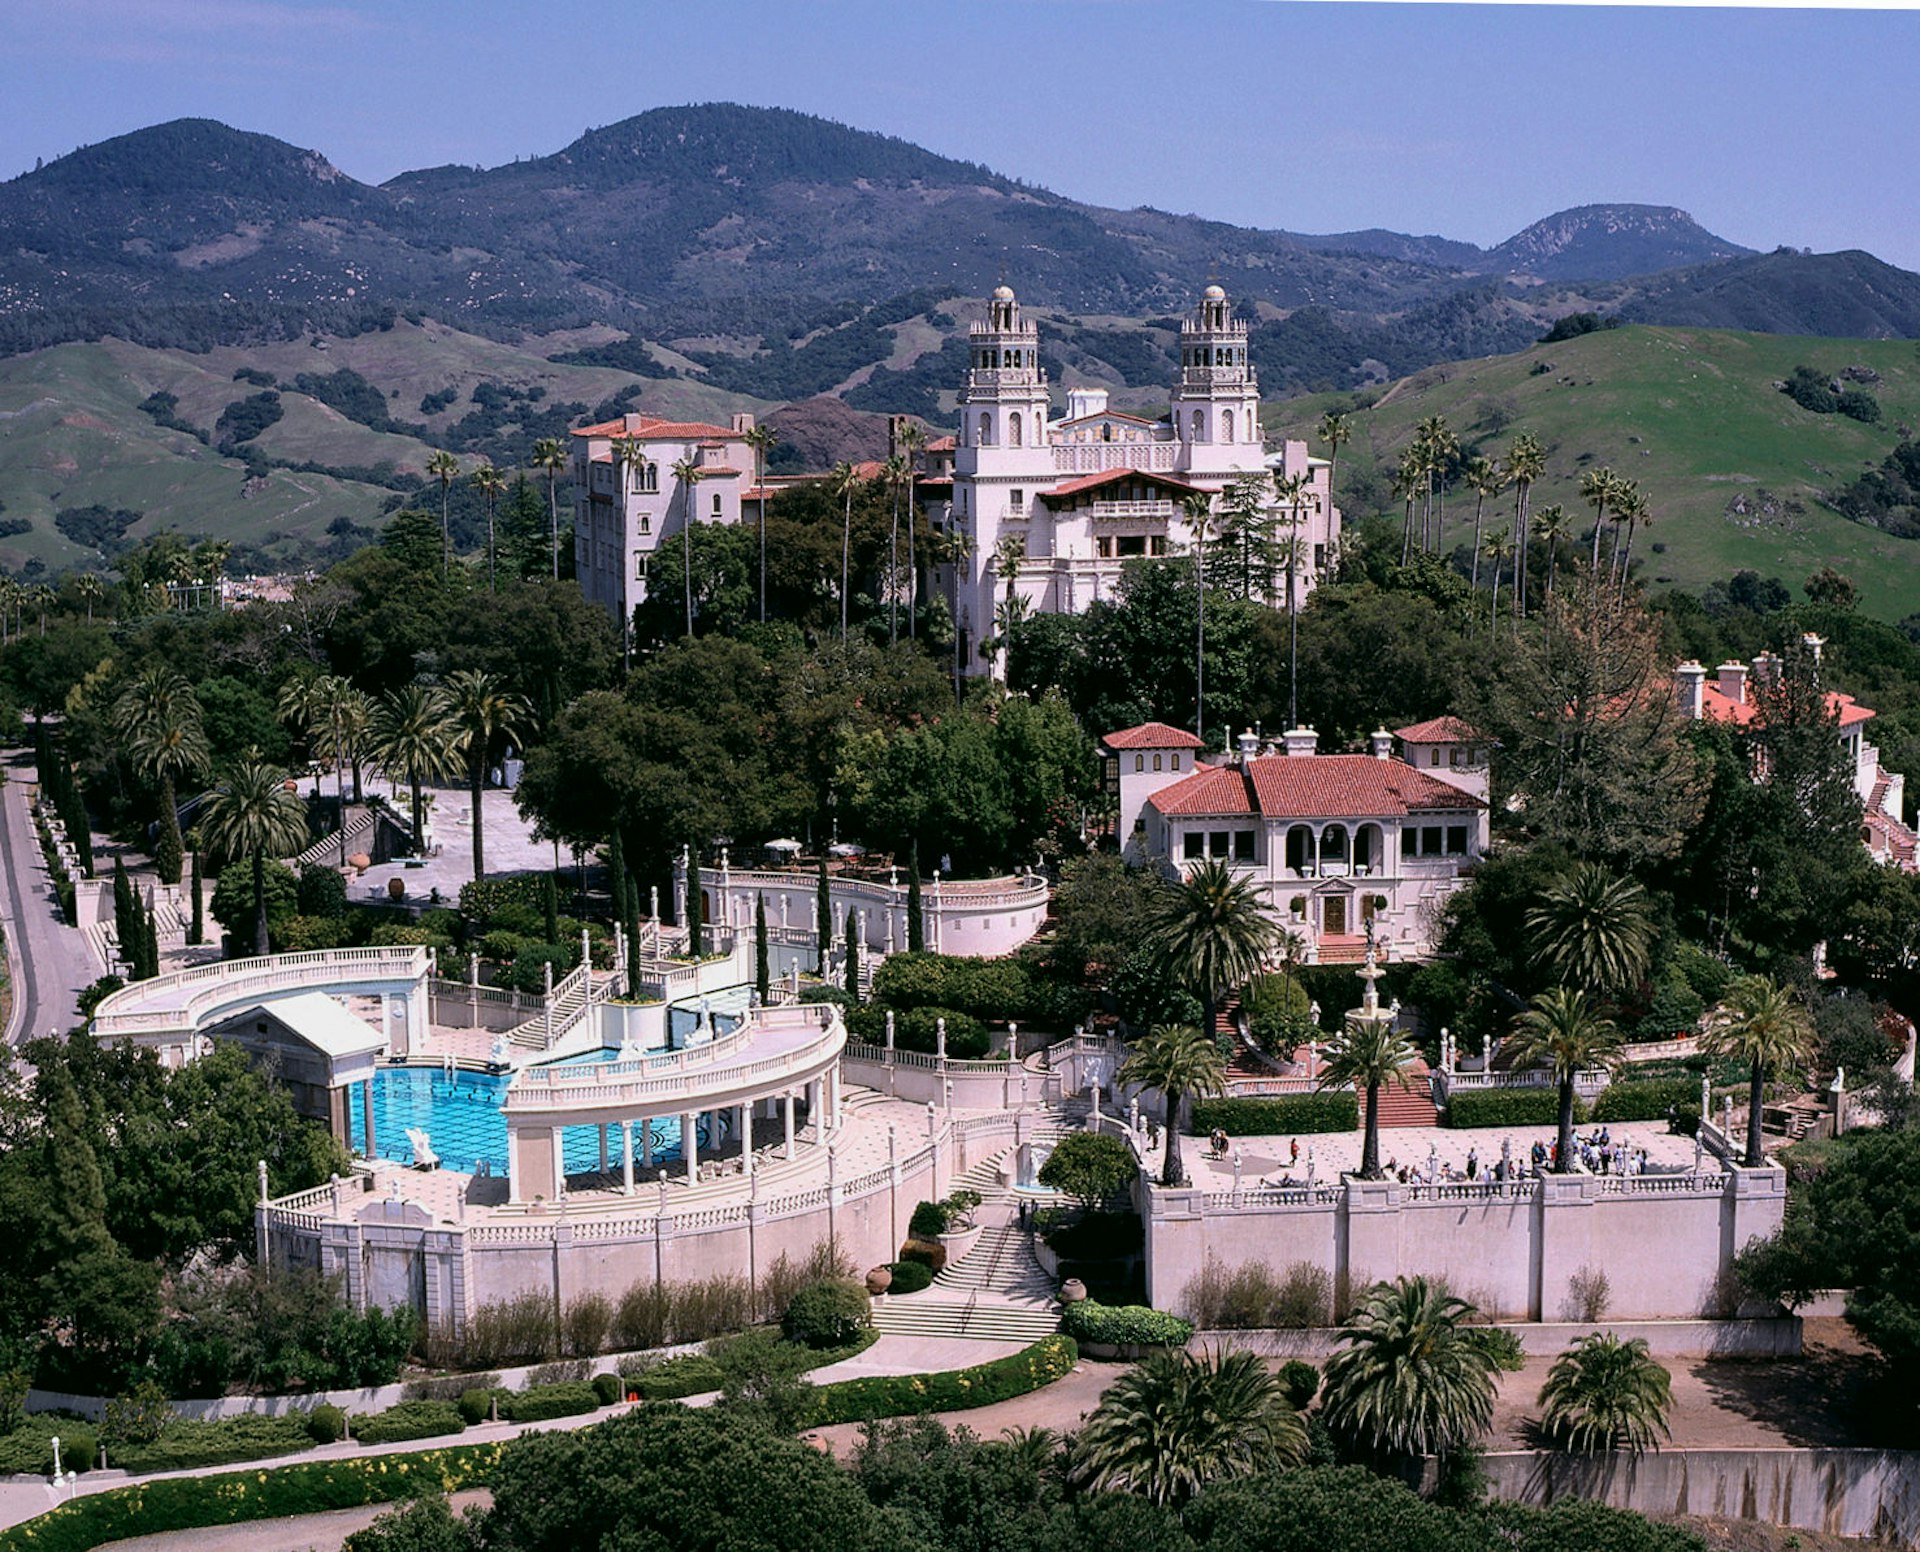 Hearst Castle is one of the top attractions in the San Luis Obispo area 